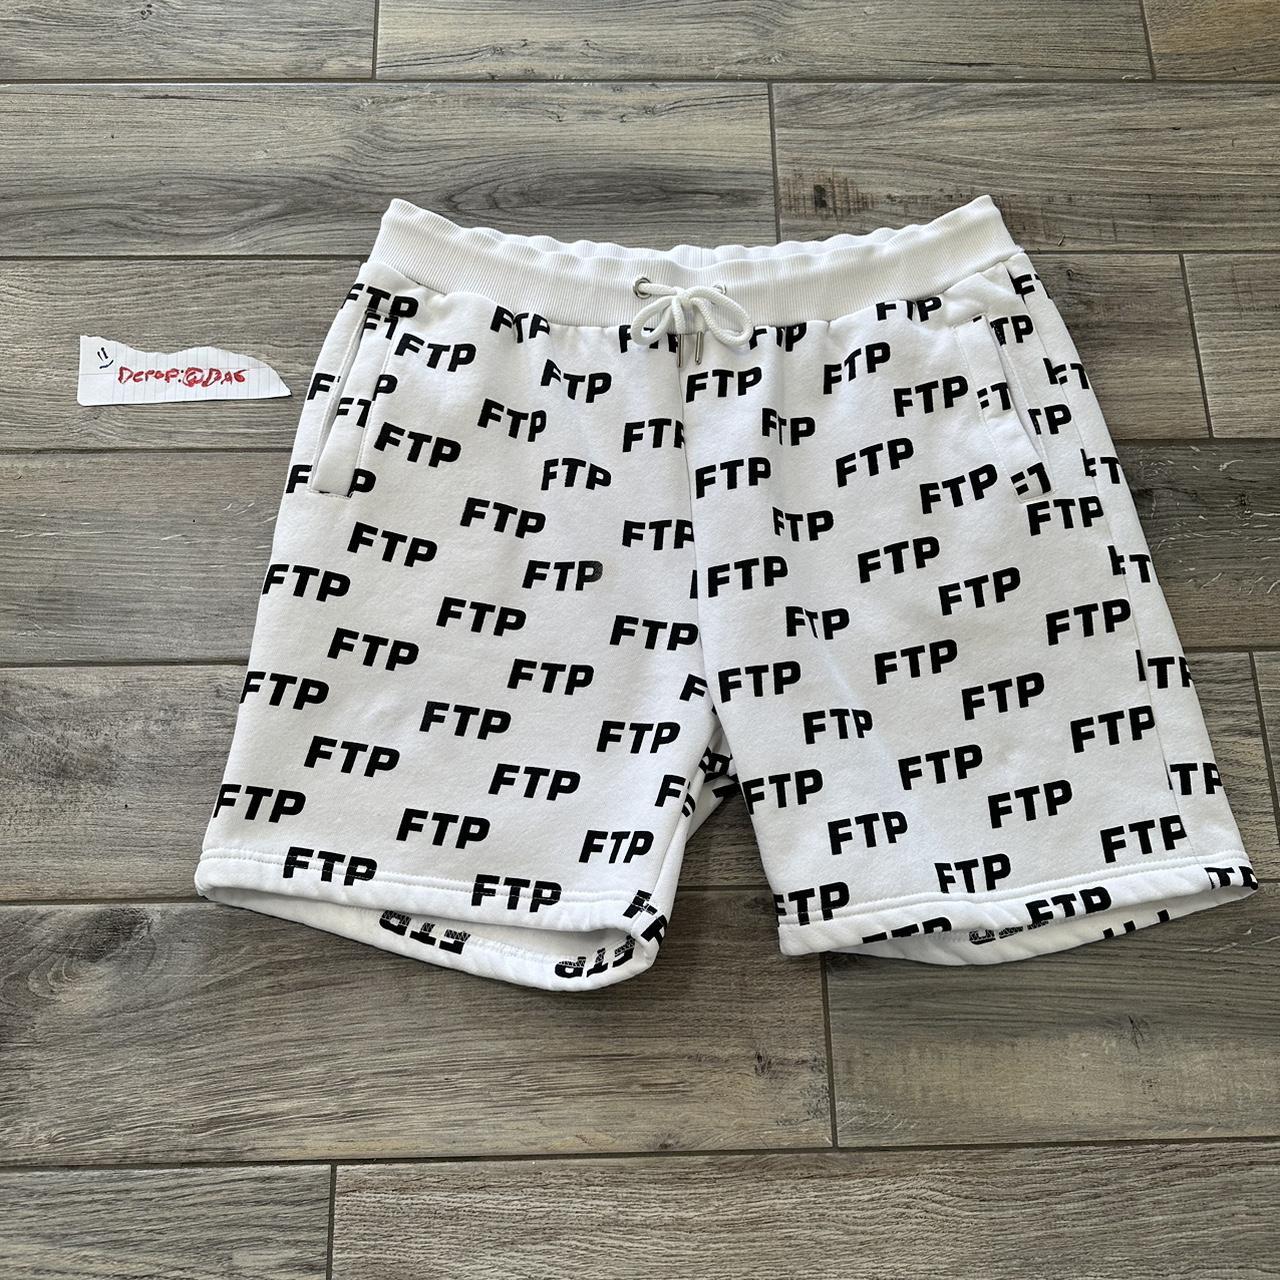 FTP All Over Shorts OG 2016 Shipping to US only. - Depop